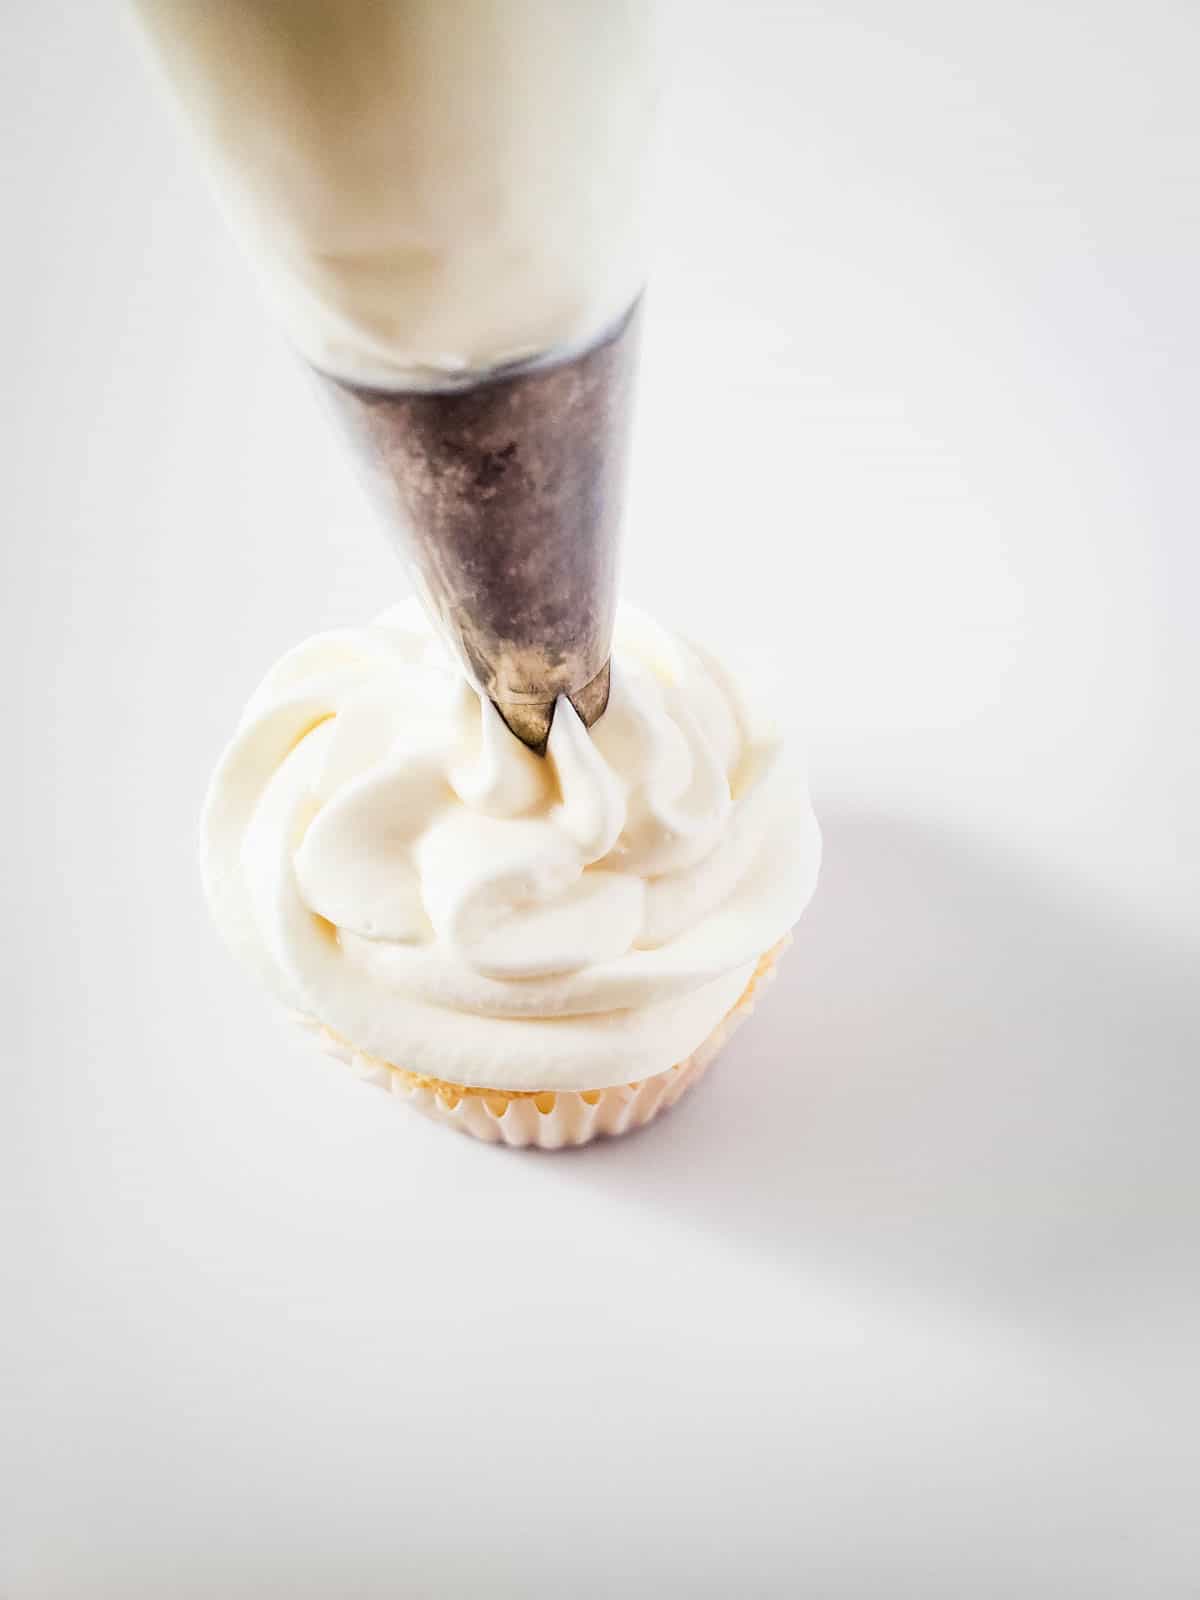 An angel food cake cupcake being frosting with white frosting.